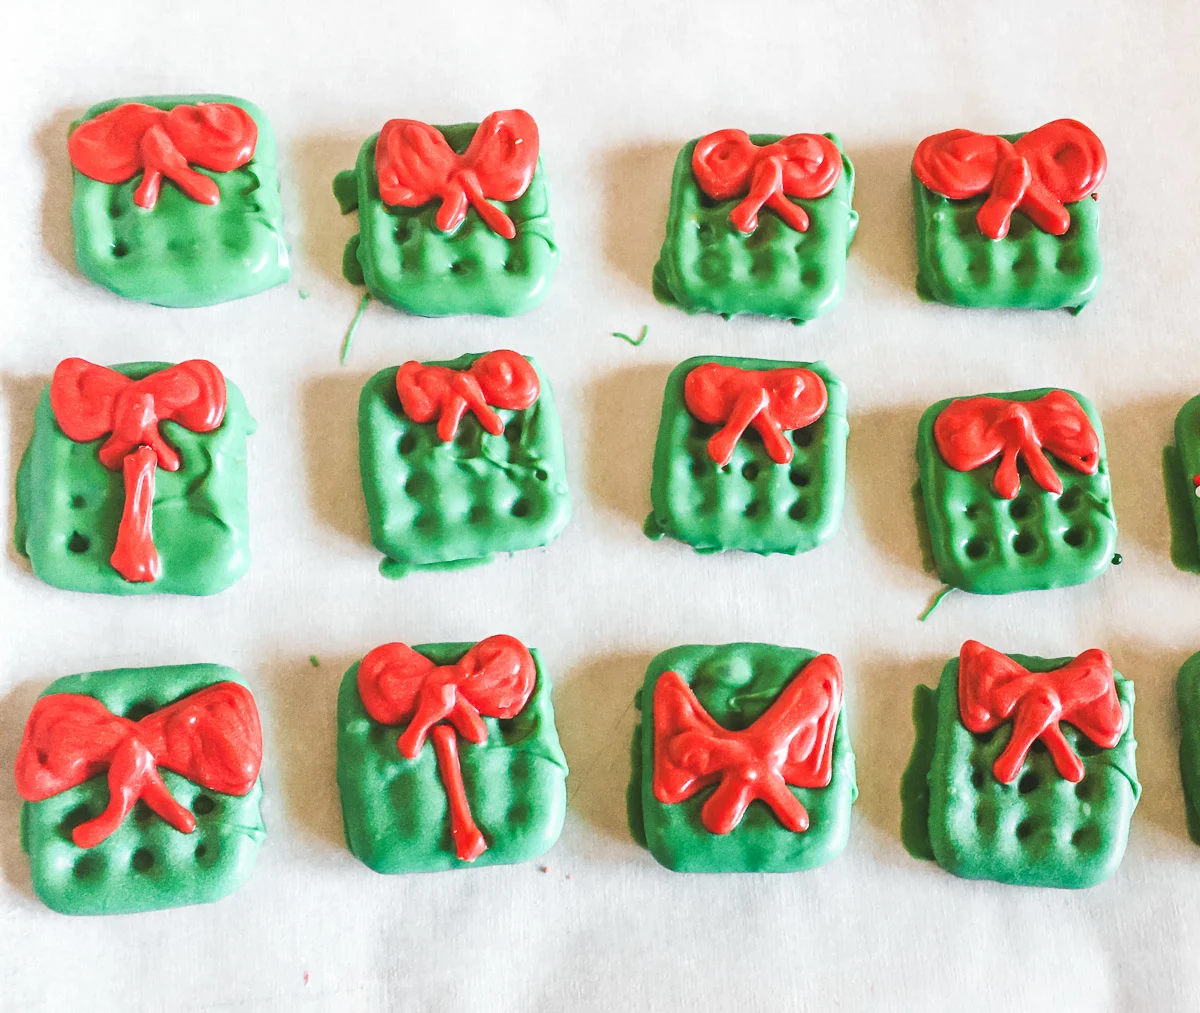 Christmas pretzels decorated like gift boxes with bows laying on parchment paper drying